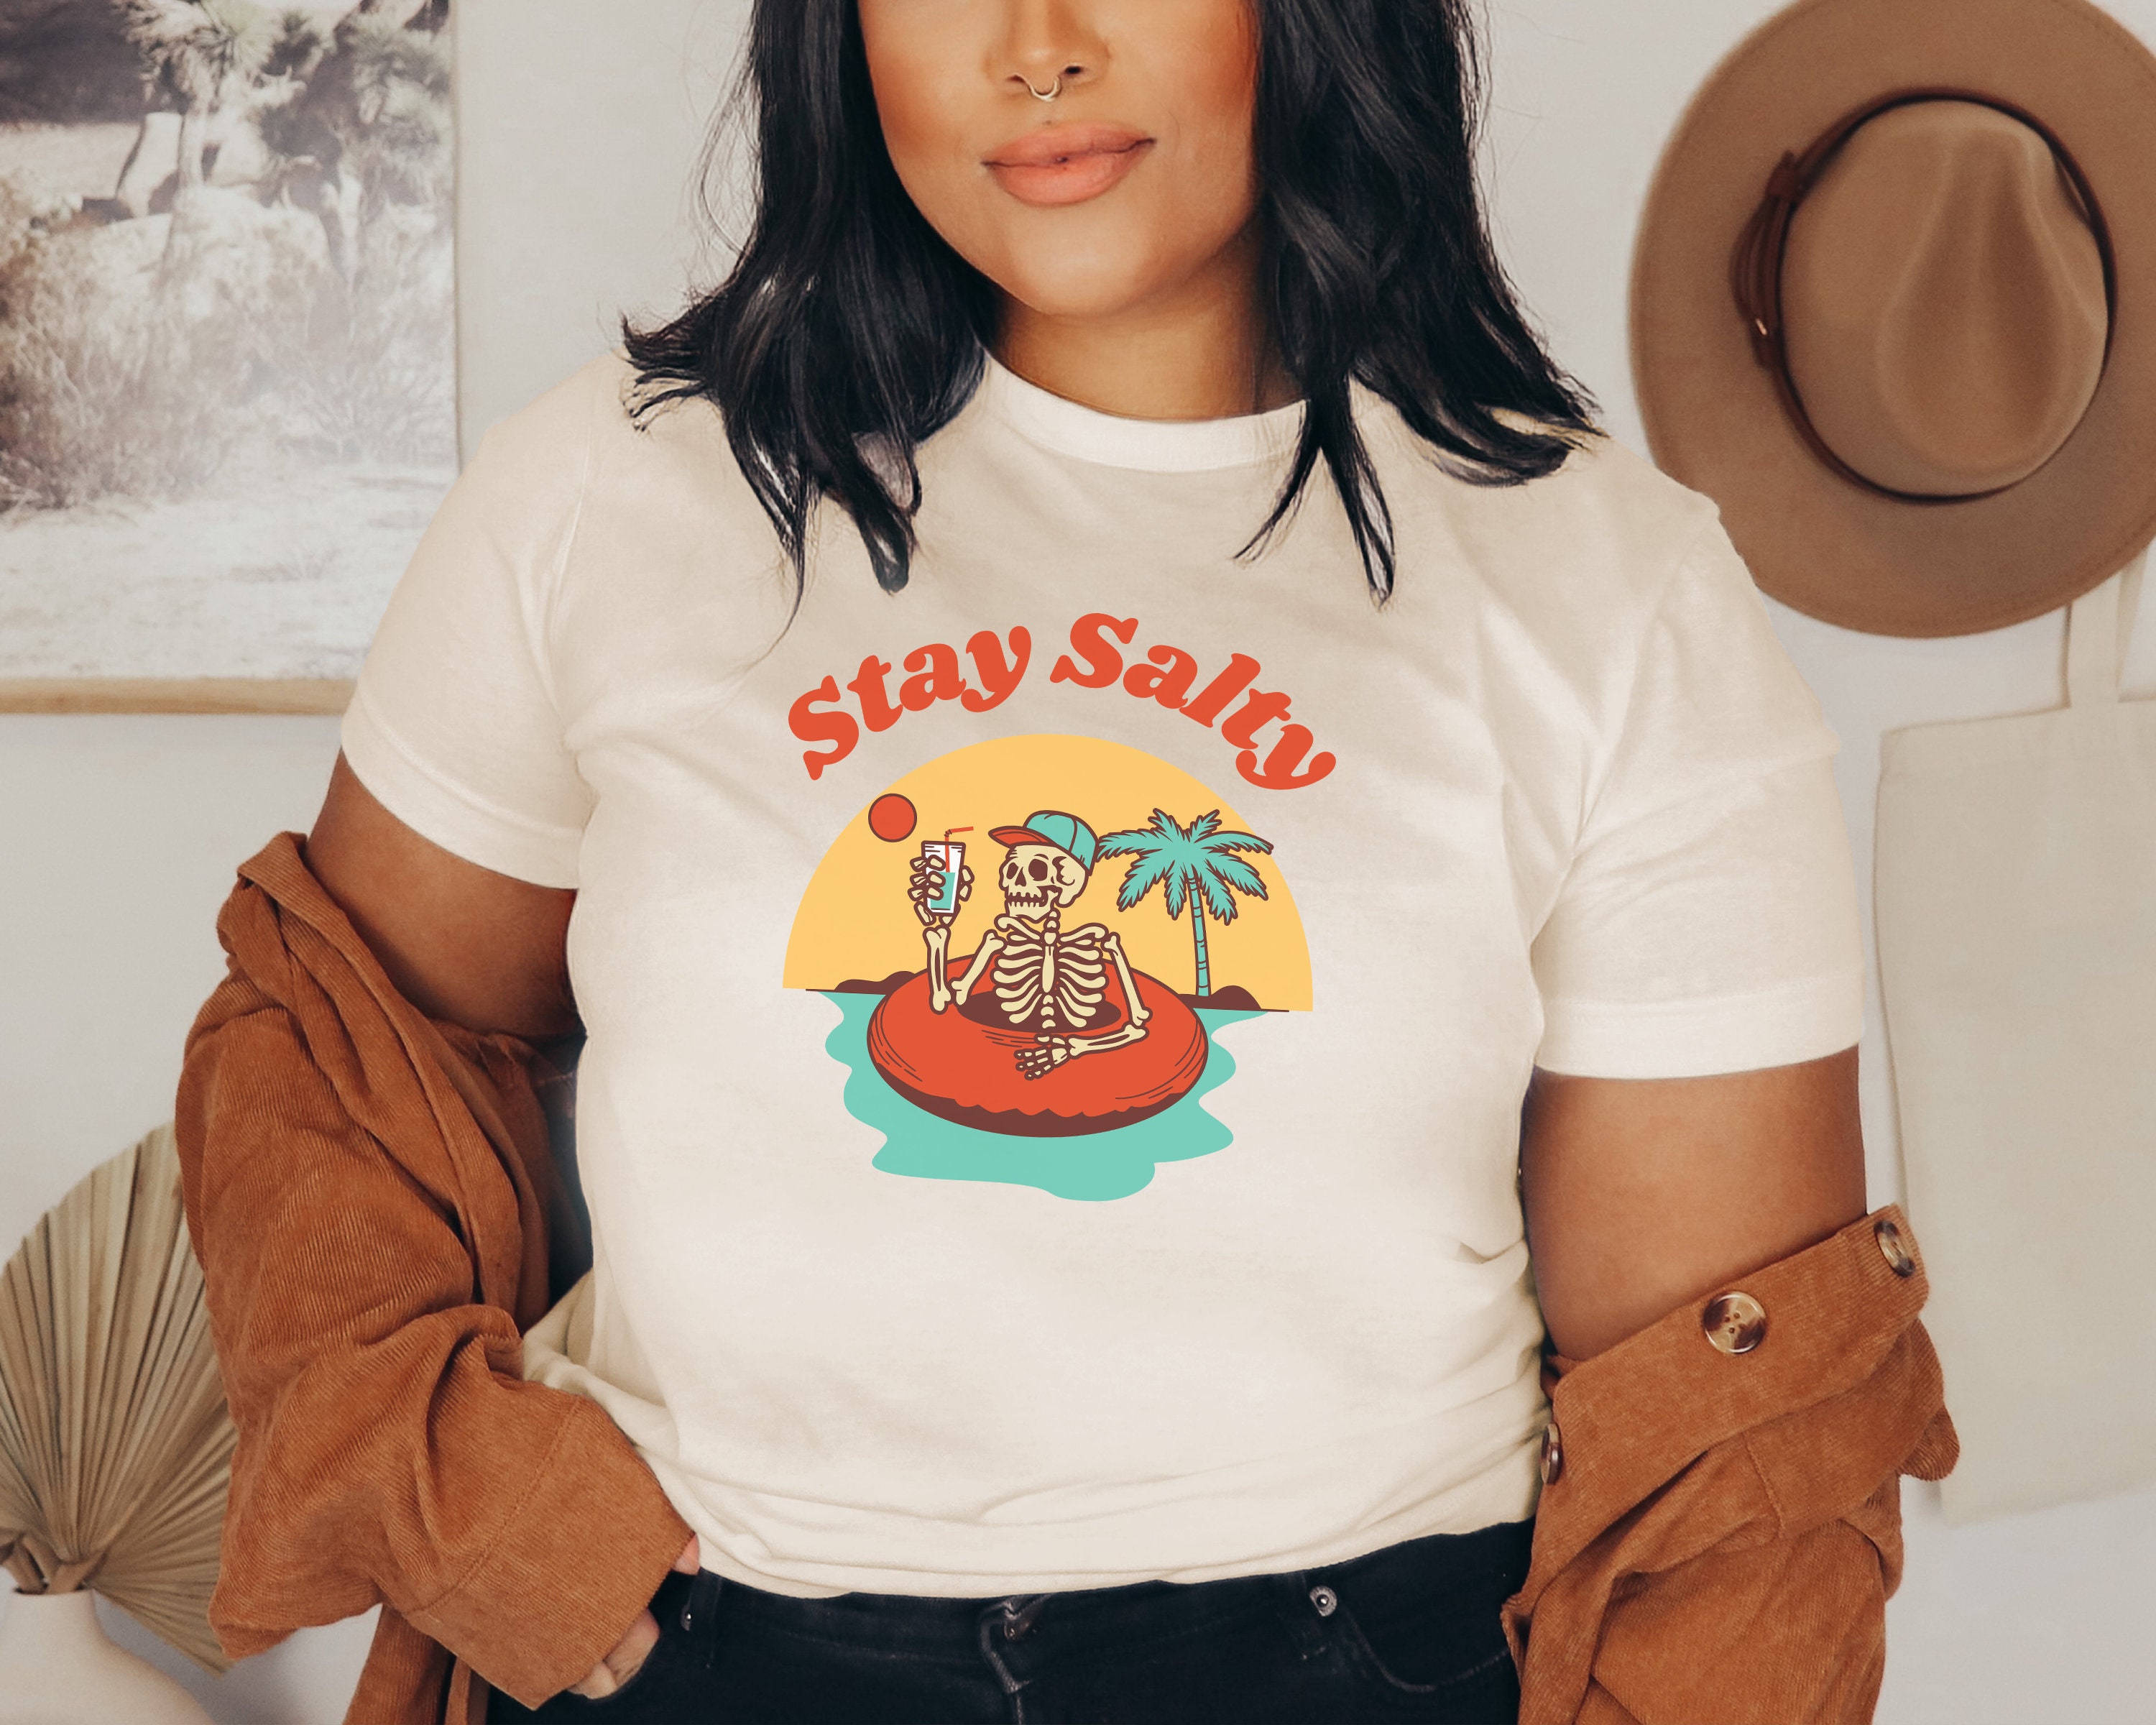 Discover Stay Salty Beach Unisex Summer Shirt, Vintage Style Tee, Summertime Vacation, Oversized Skeleton Grunge T-Shirt